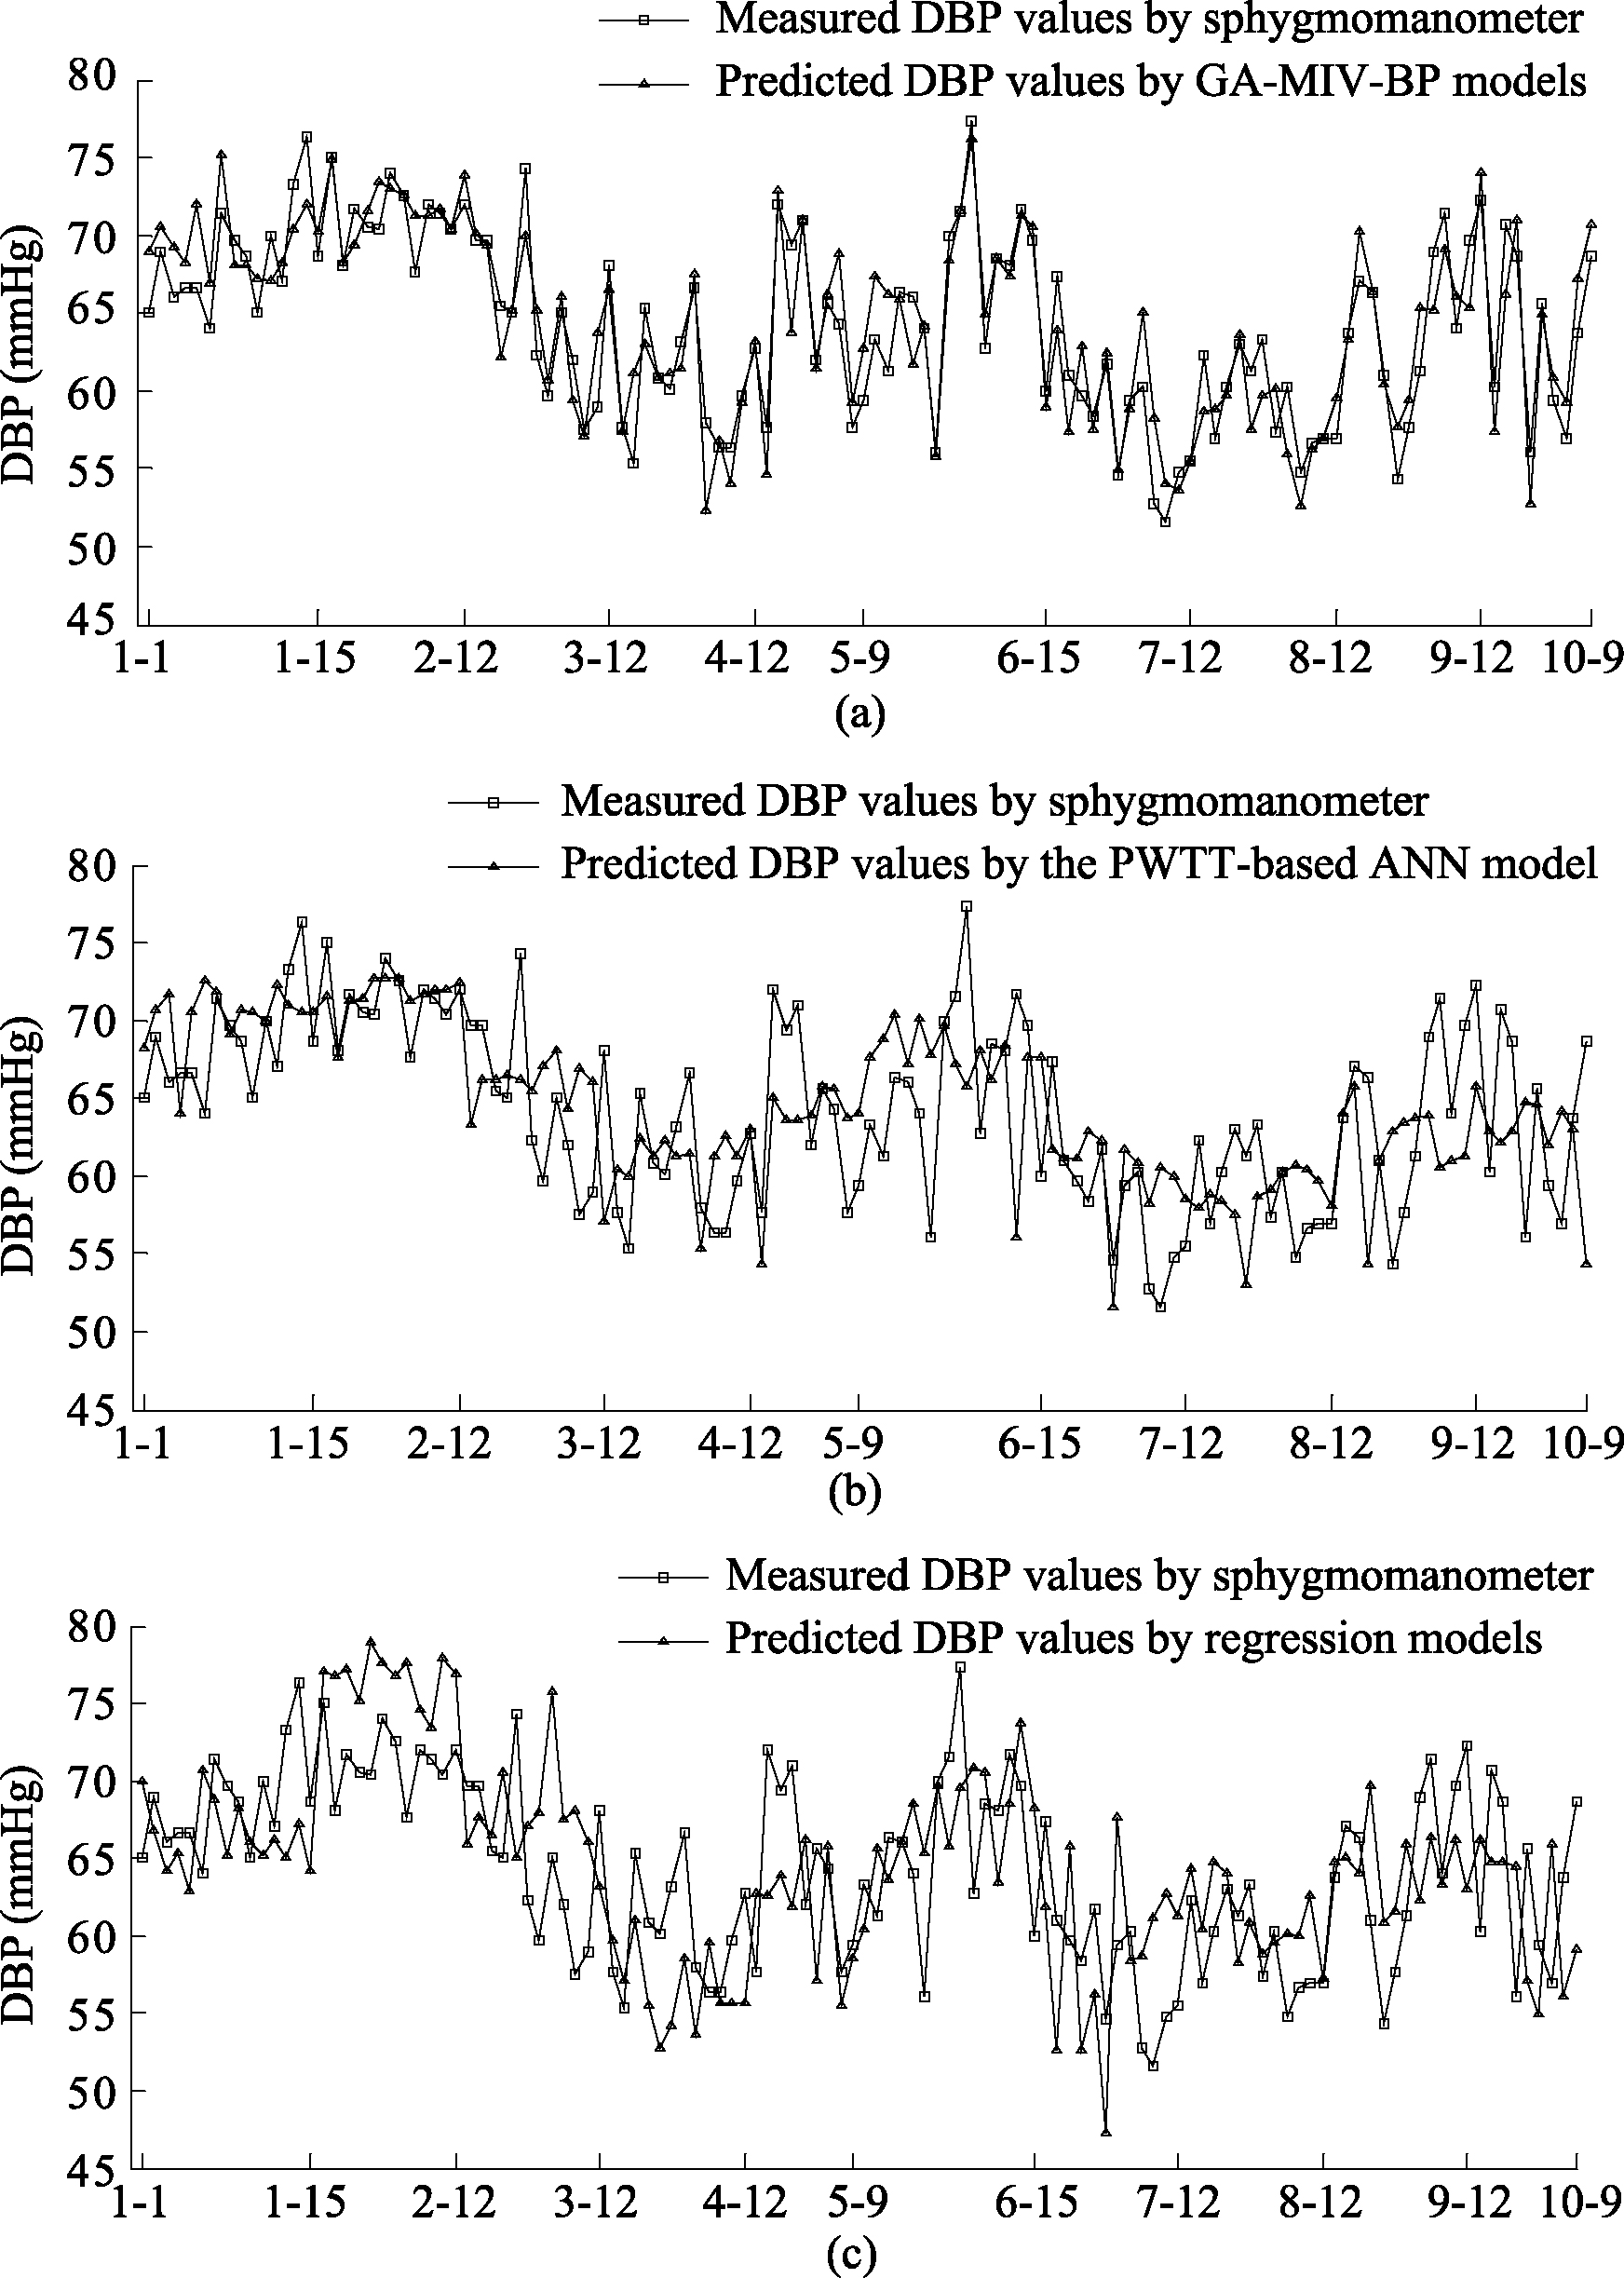 Comparison of predicted and measured values of DBP.